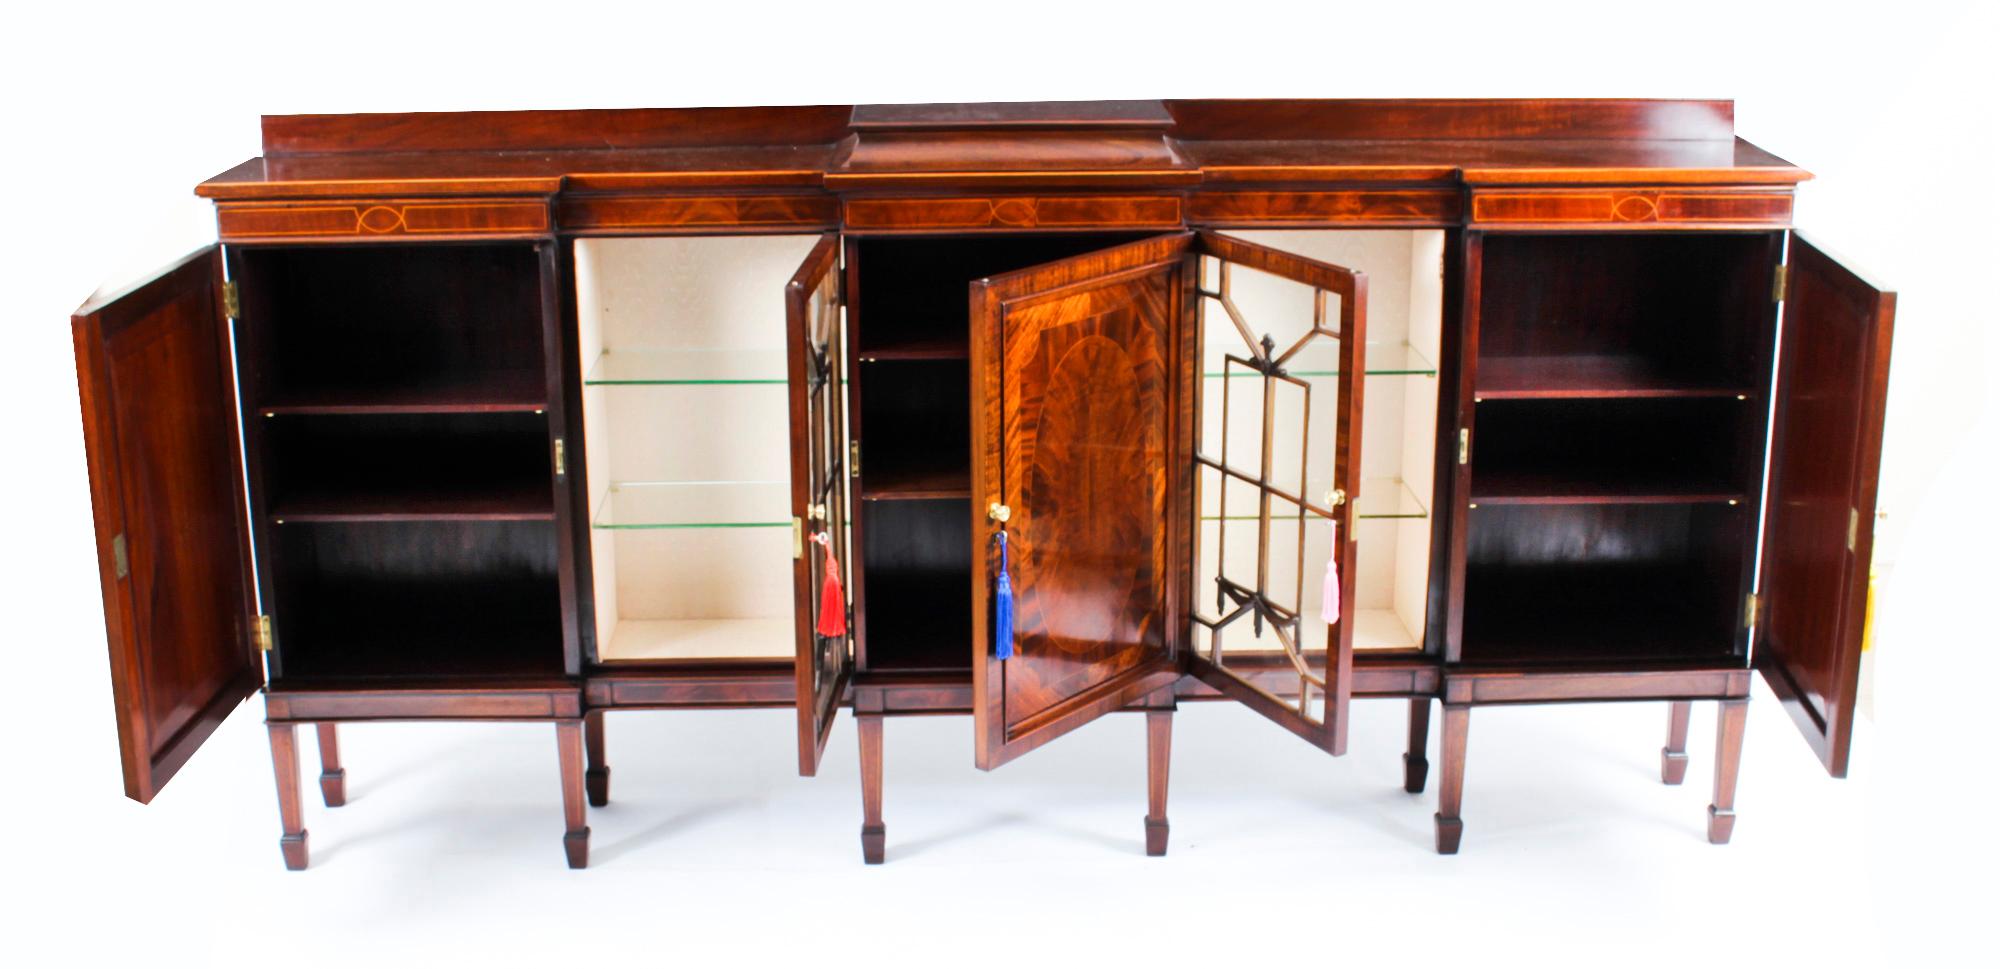 English Antique Edwardian Breakfront Sideboard Display Cabinet, Early 20th Century